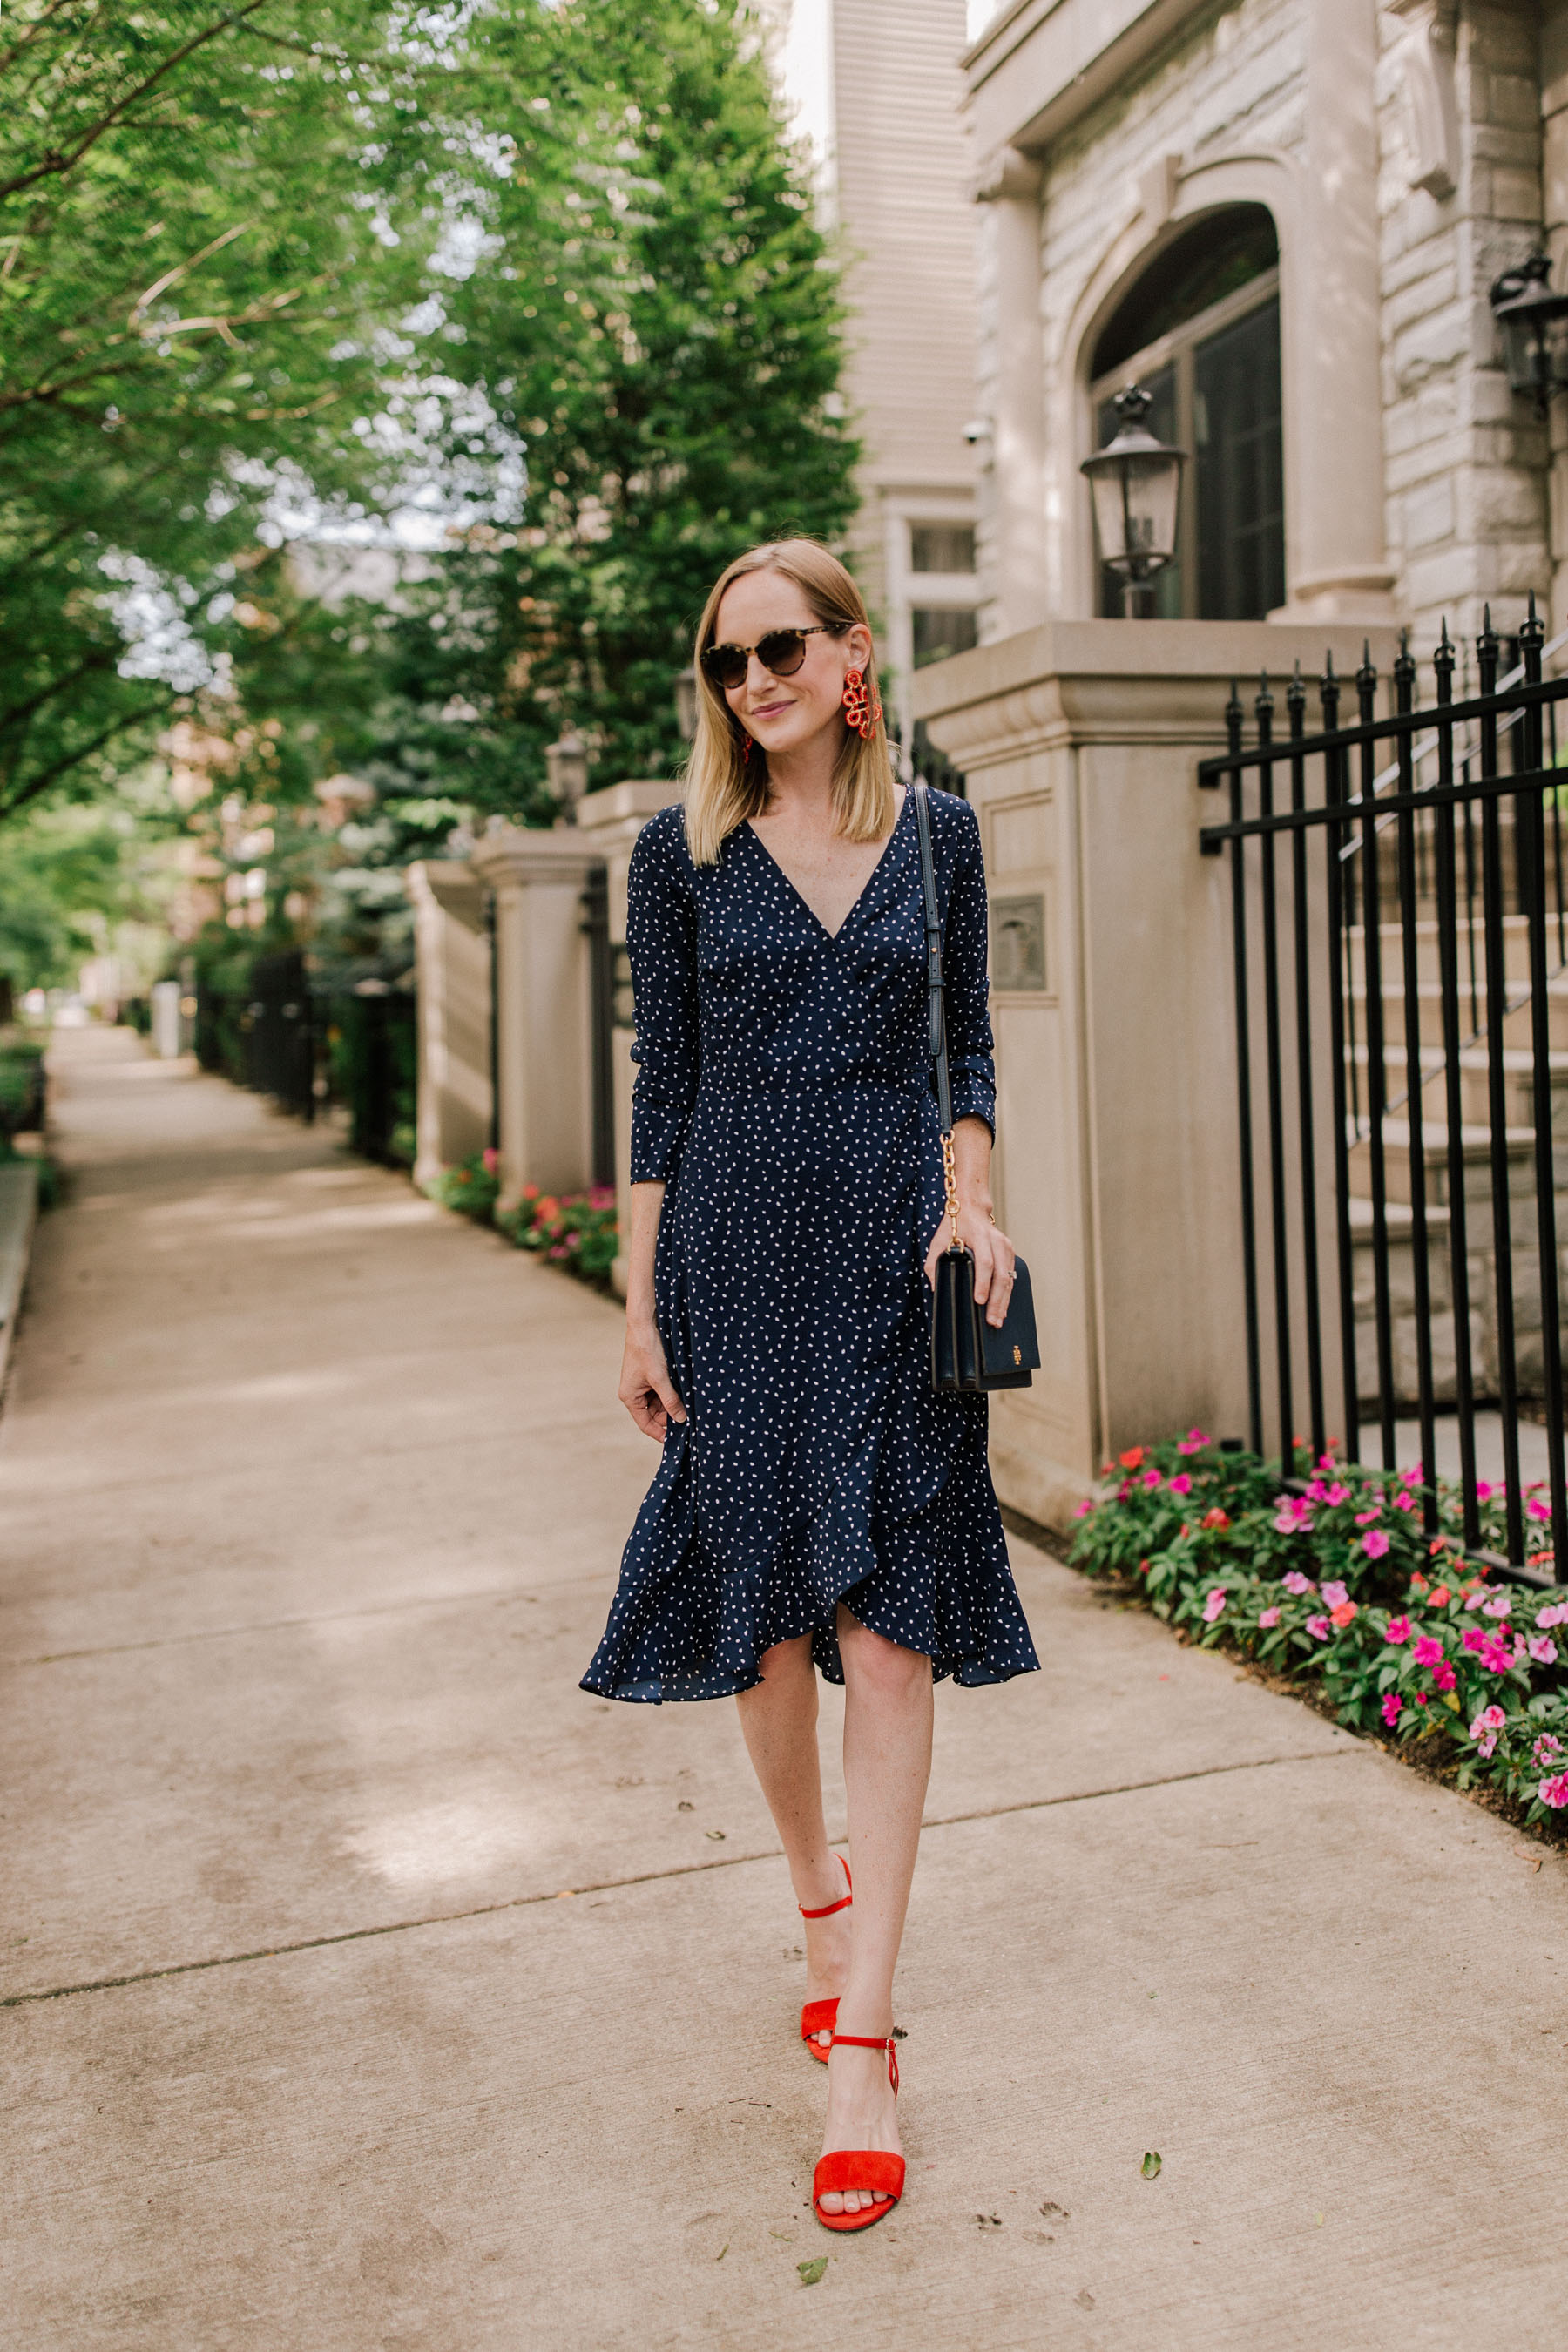 Nordstrom: Navy Polka Dot Dress / Tory Burch Navy Bag / Red Strappy Sandals (You can also find them at J.Crew.) - Kelly in the City